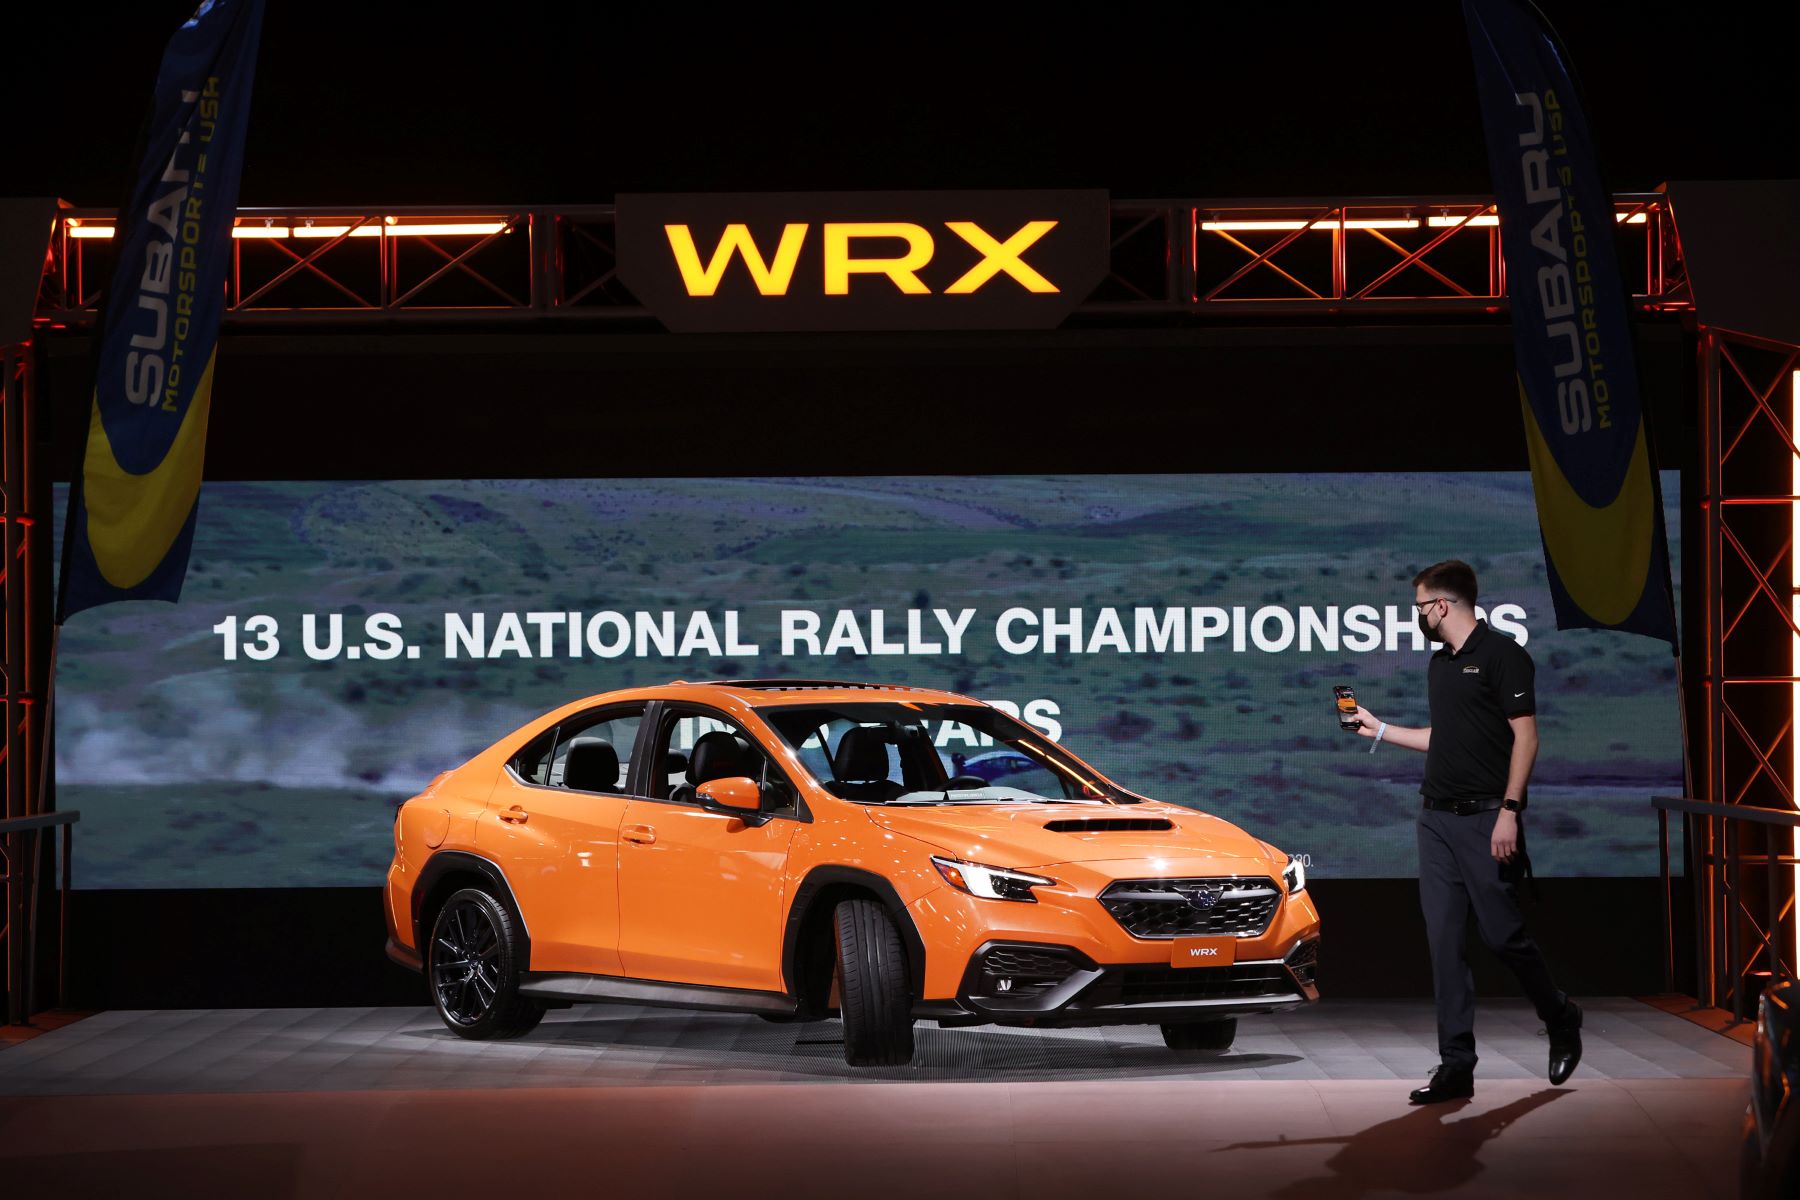 An orange Subaru WRX at the McCormick Place convention center during the Chicago Auto Show